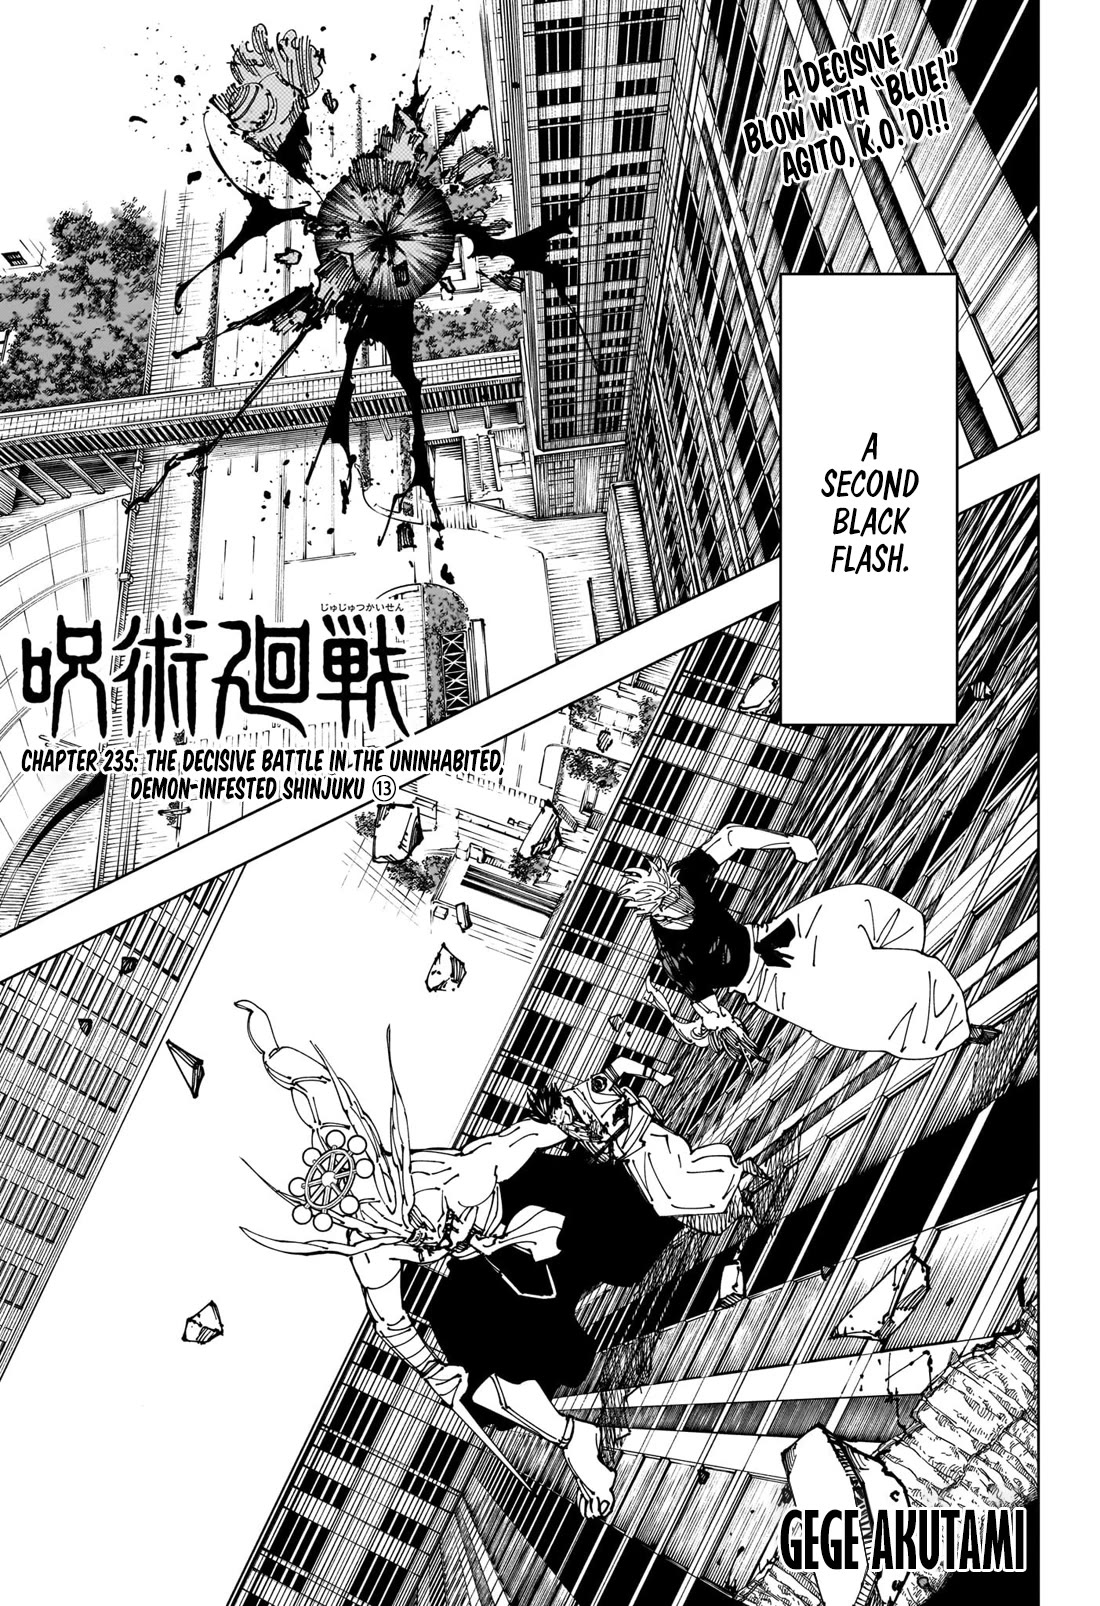 Jujutsu Kaisen Chapter 235: The Decisive Battle In The Uninhabited, Demon-Infested Shinjuku ⑬ - Picture 1